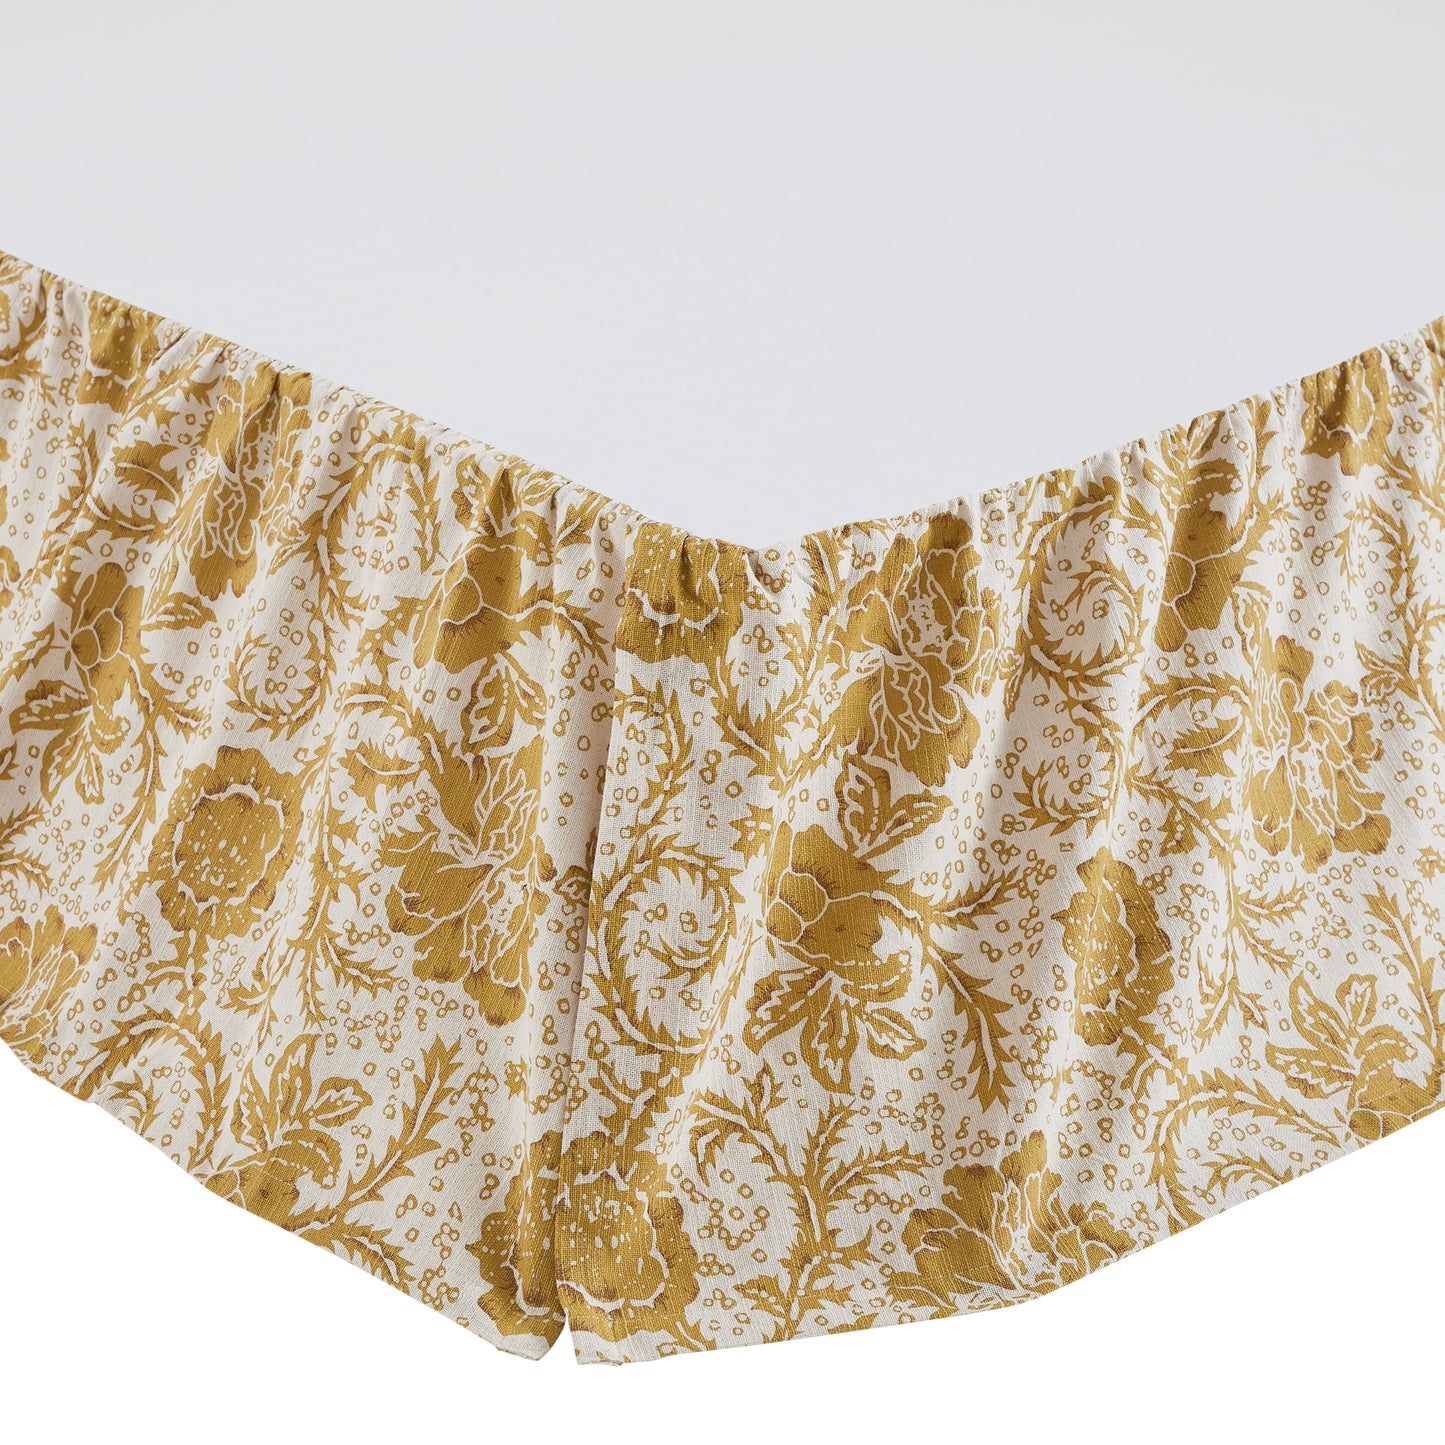 81191-Dorset-Gold-Floral-Twin-Bed-Skirt-39x76x16-image-5